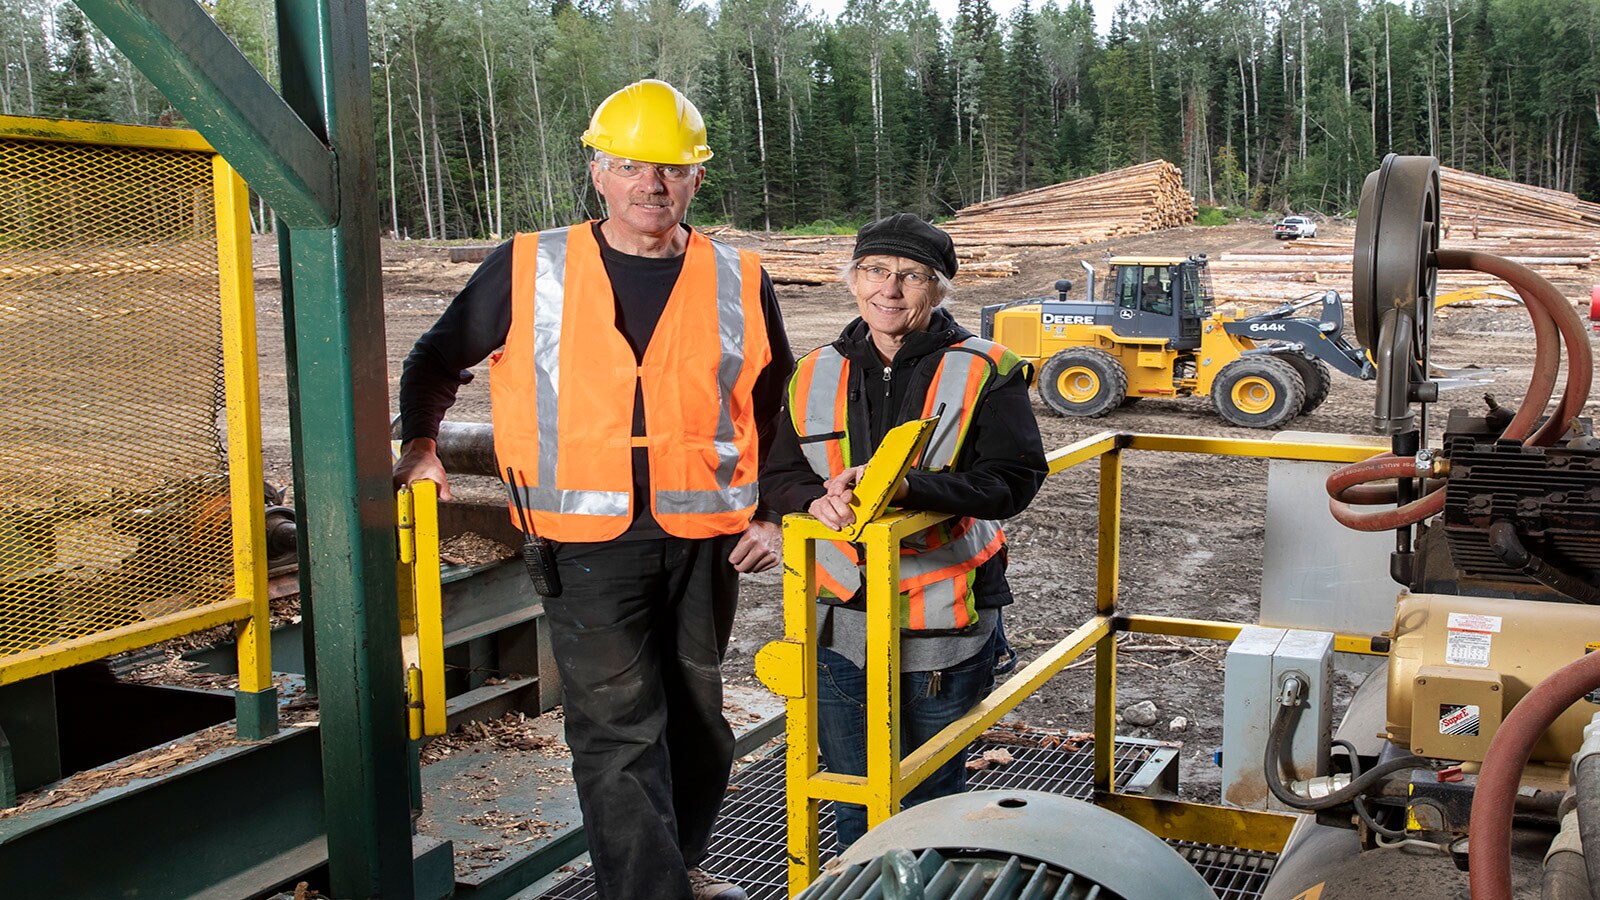 Kirsteen Laing and Andy Thompson pictured at their sawmill in British Columbia.